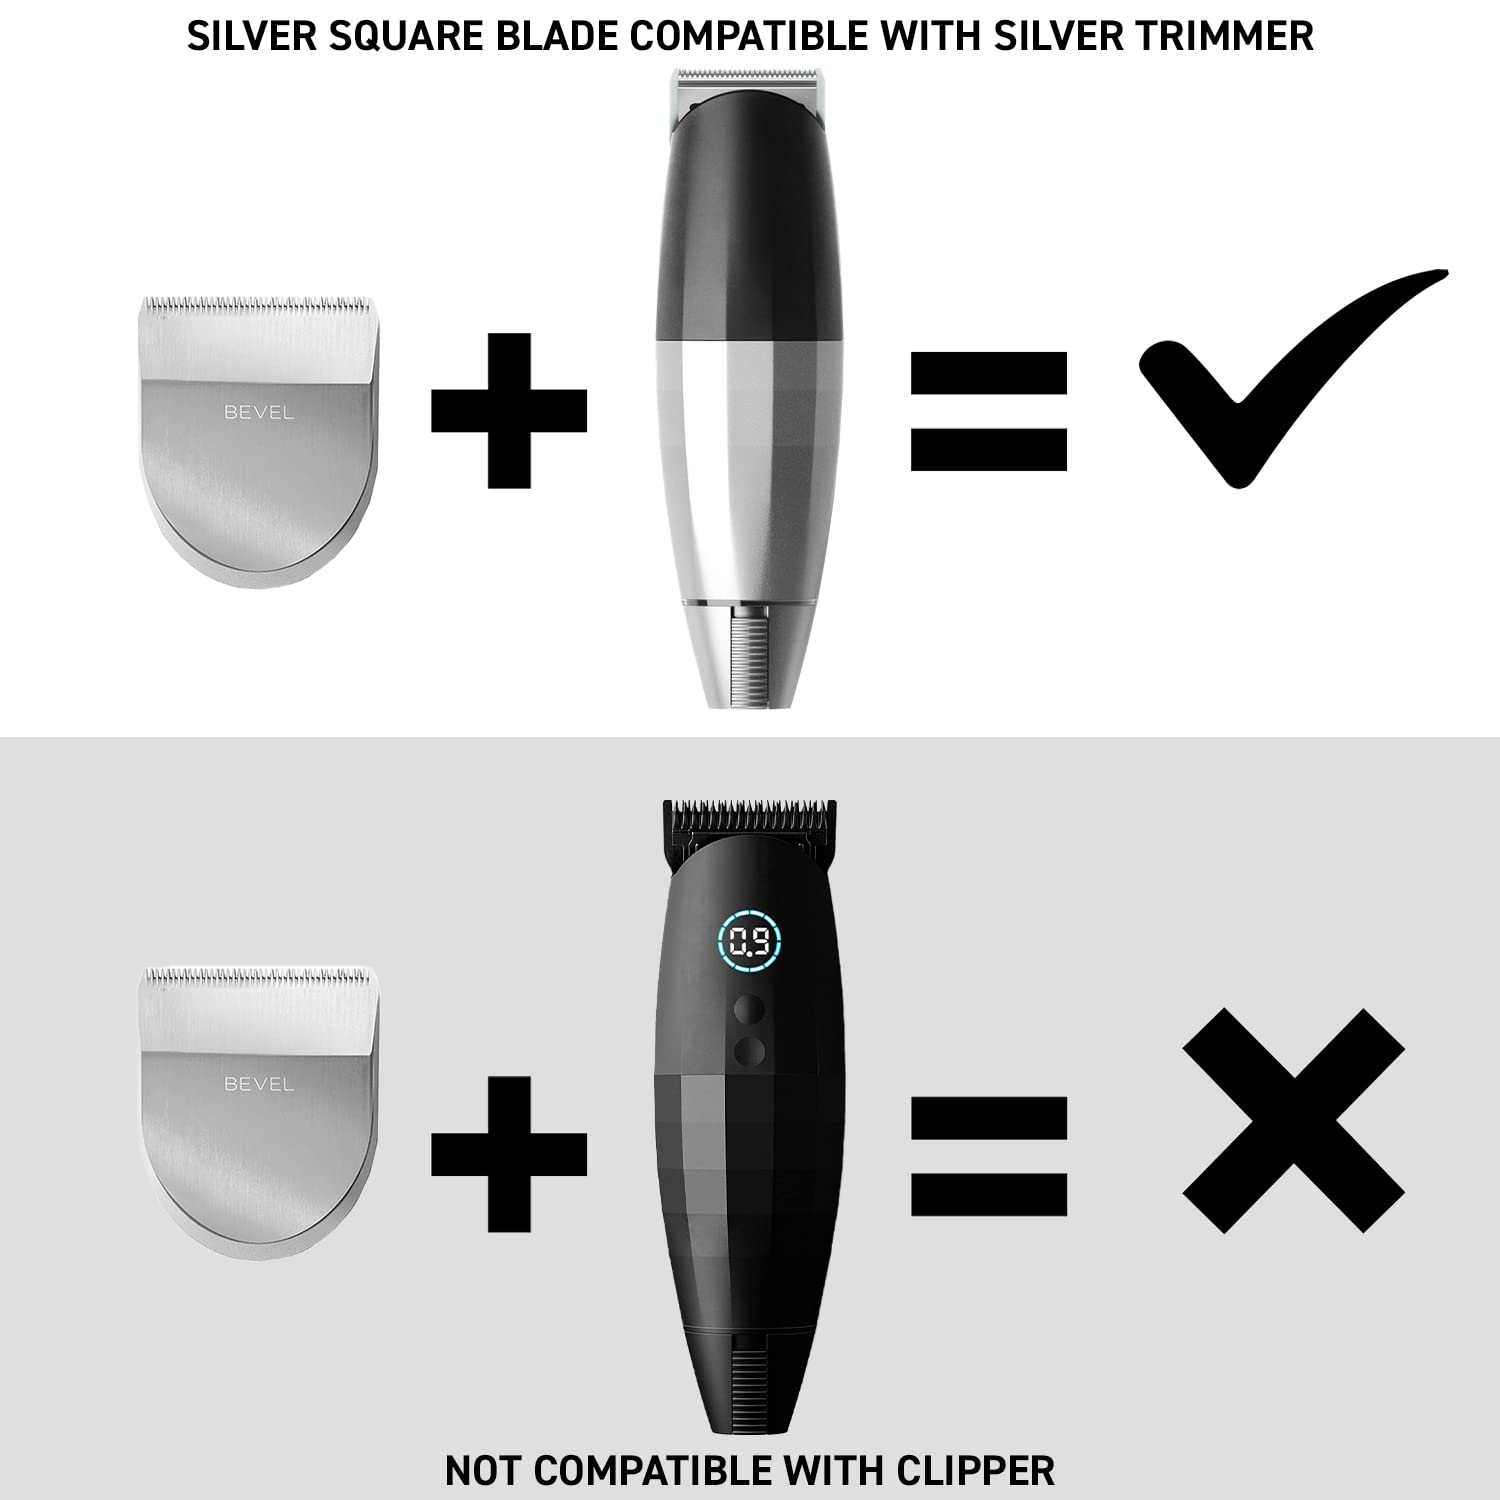 Bevel Square Trimmer Blade Attachment - Compatible with Bevel Trimmer Only, Beard Trimmer for Men, Mustache Trimmer, Cordless Face, Neck and Body Hair Trimmer Attachment Head - Silver, 1 Count : Beauty & Personal Care